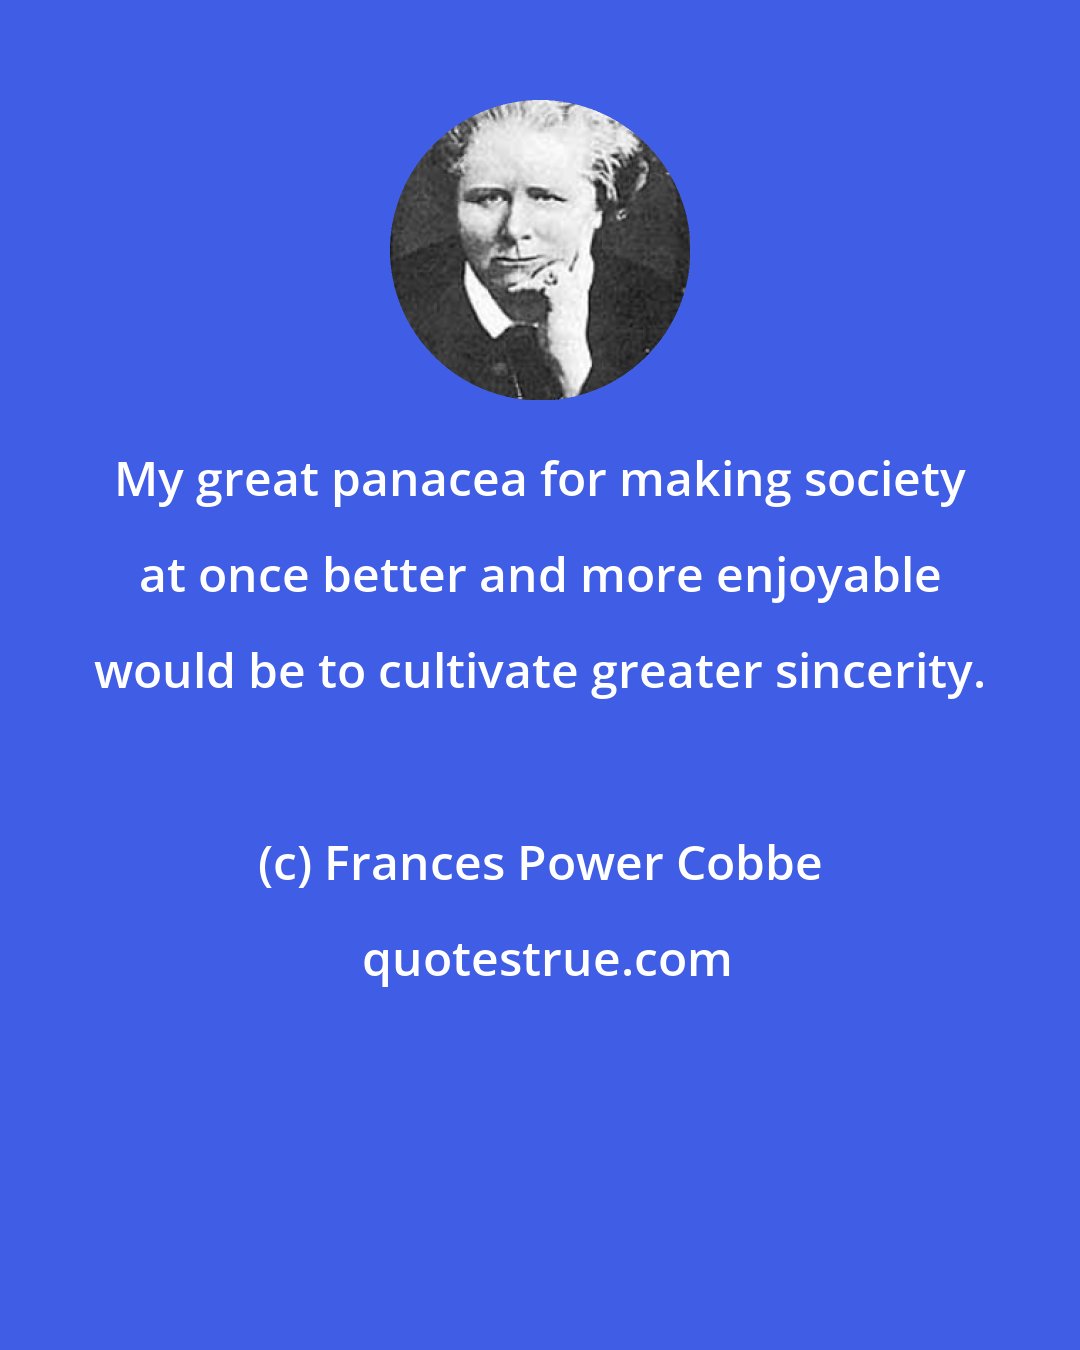 Frances Power Cobbe: My great panacea for making society at once better and more enjoyable would be to cultivate greater sincerity.